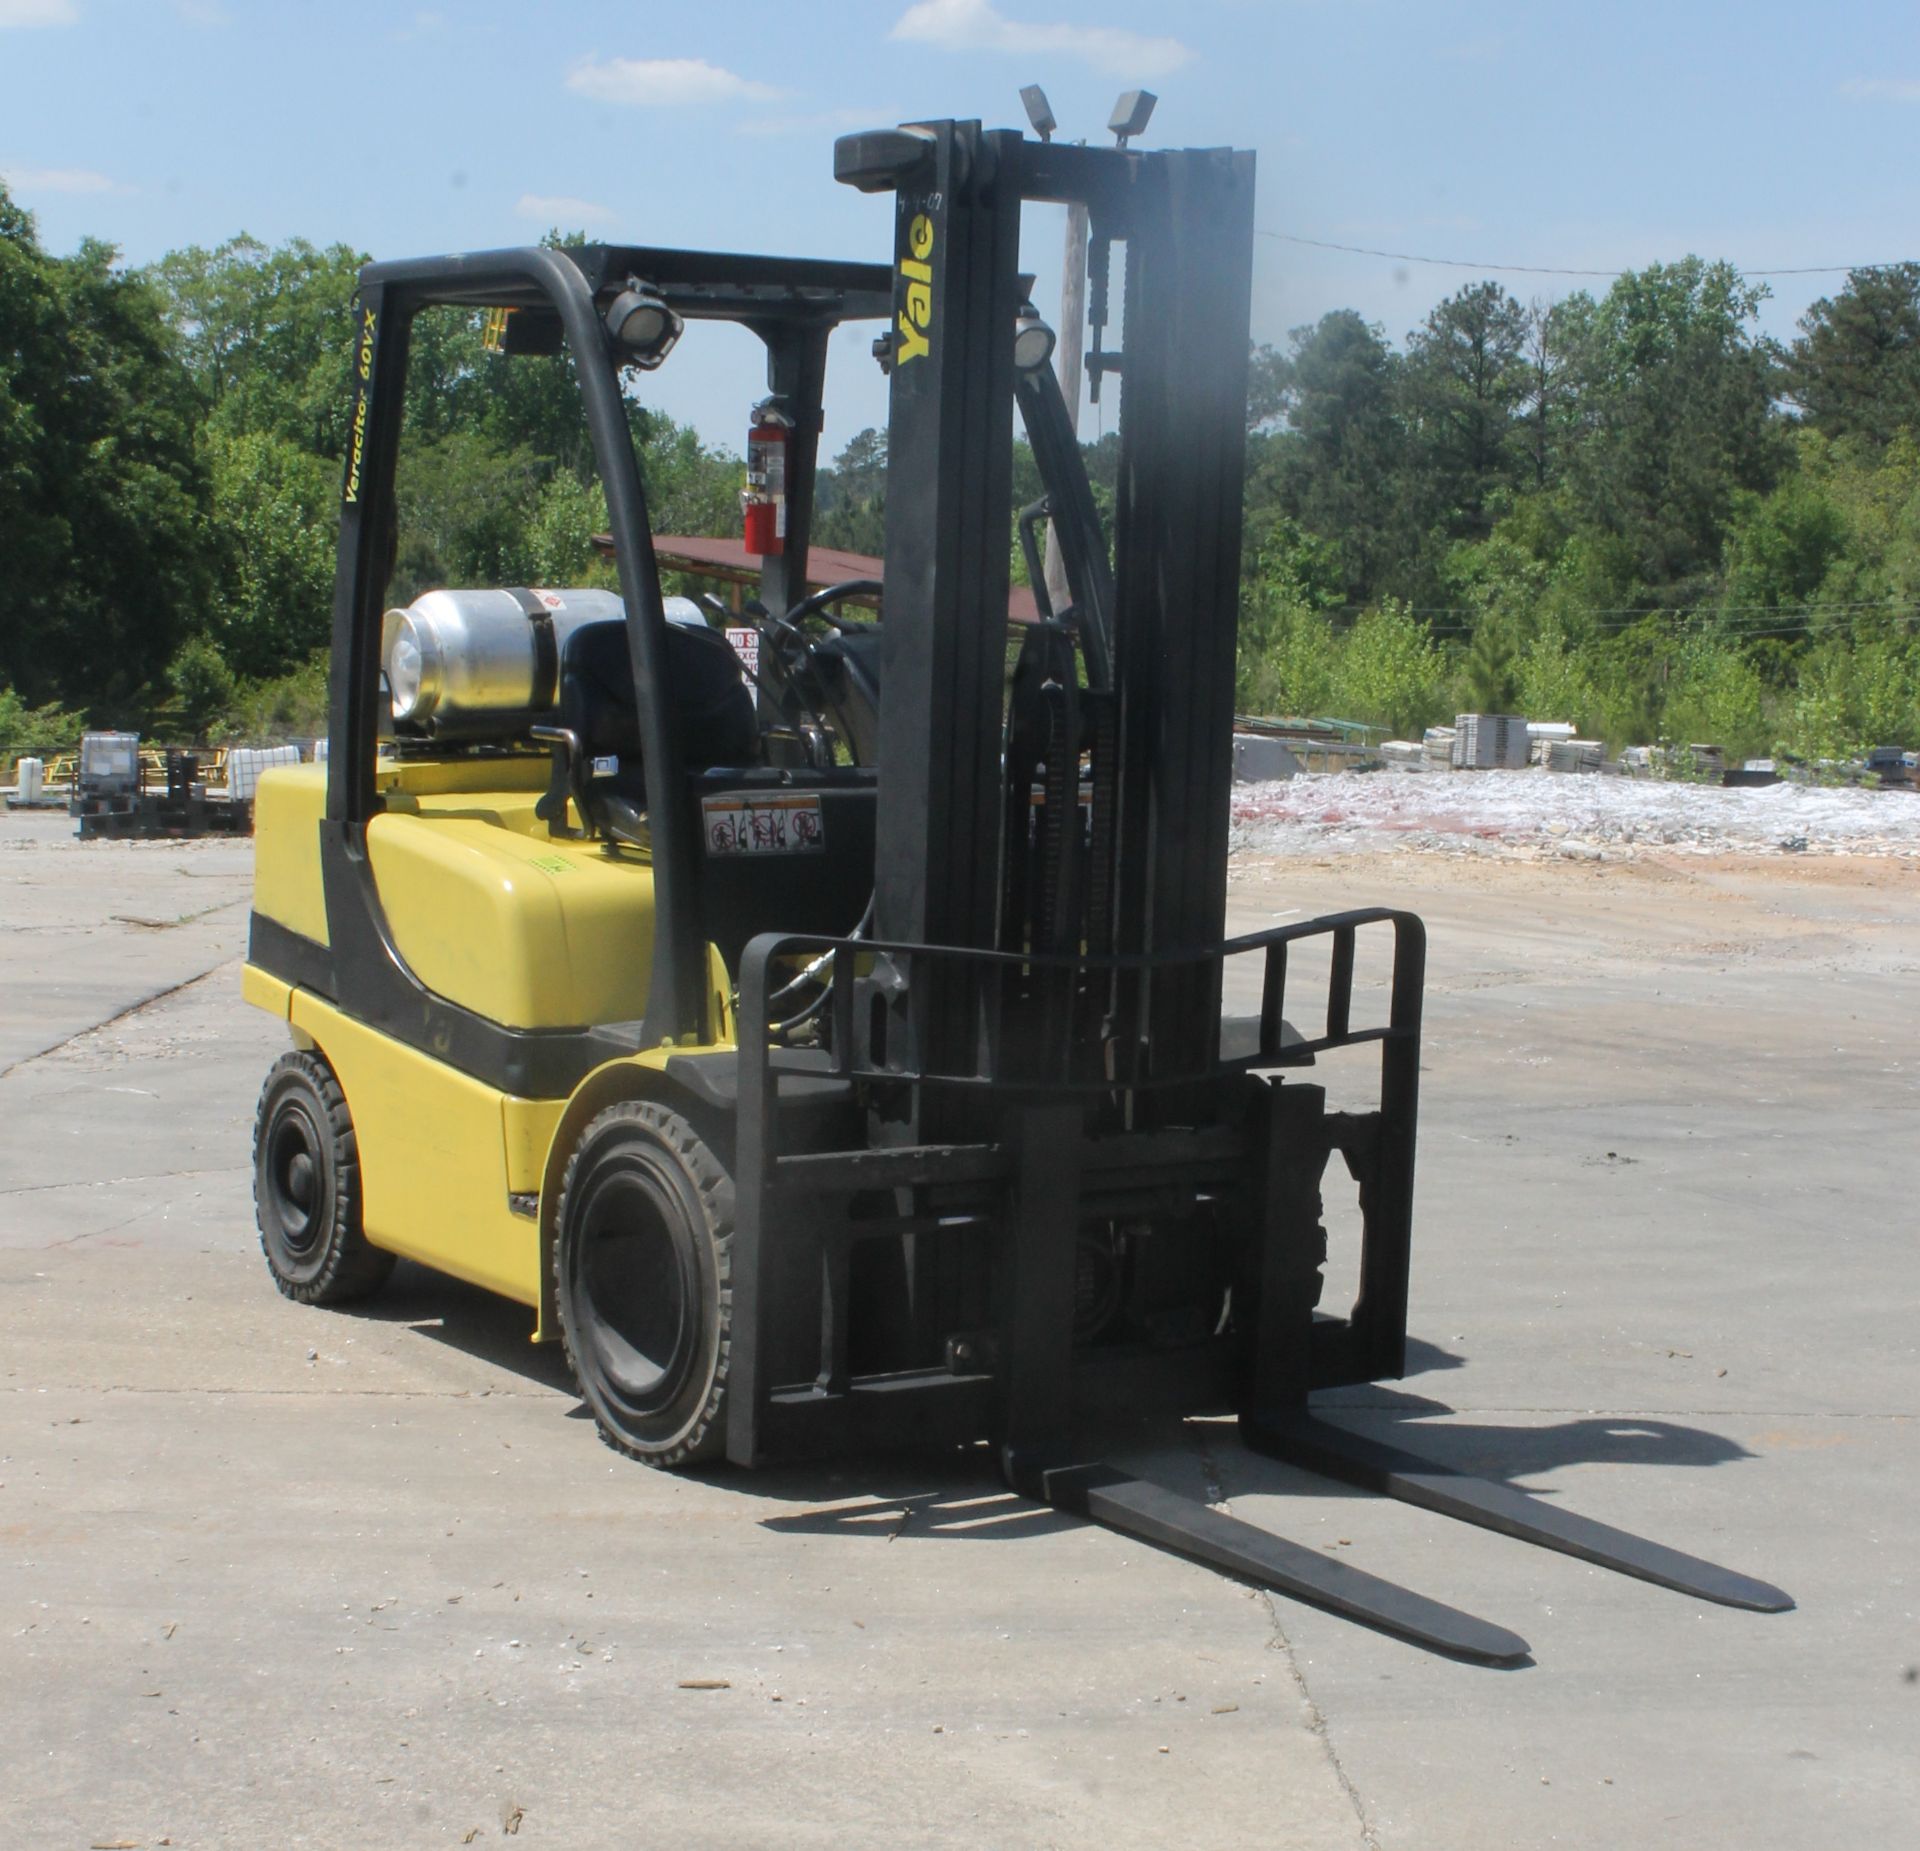 2007 YALE PROPANE FORKLIFT 5000 CAPACITY (WATCH VIDEO) - Image 3 of 5